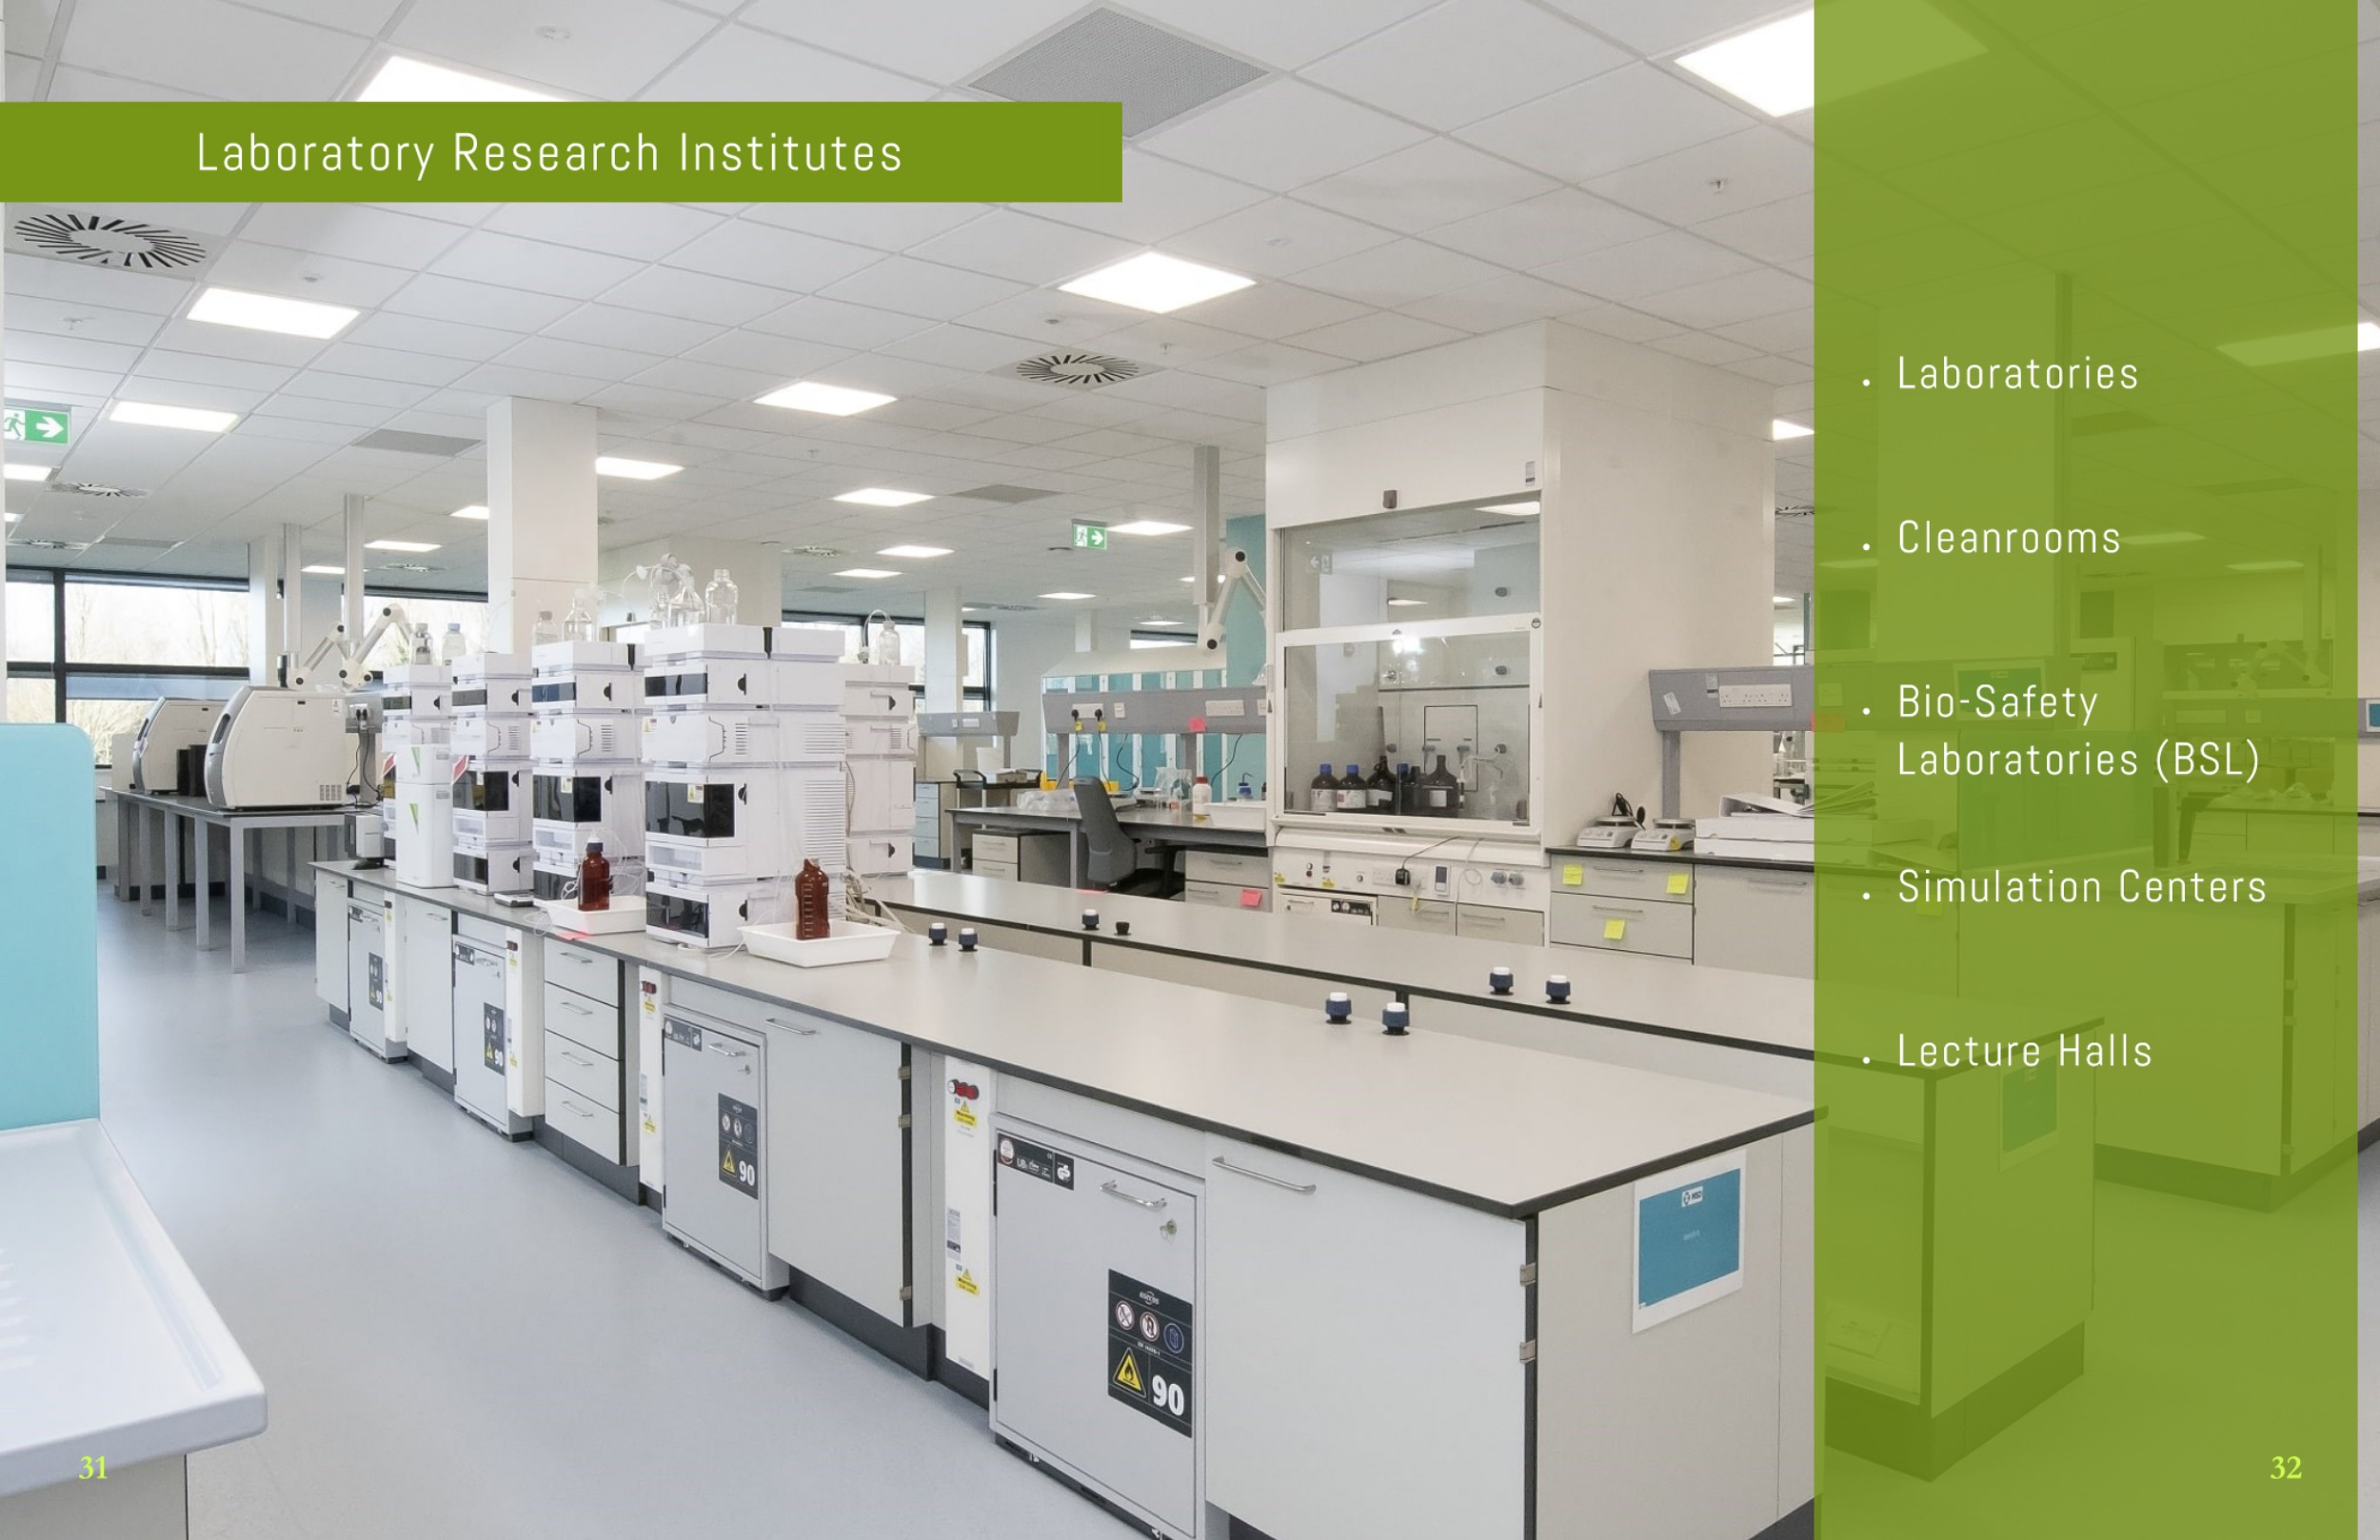 IPS Capabilities Booklet Laboratory Research Institutes spread with services including Laboratories, Cleanrooms, Bio-Safety Laboratories (BSL), Simulation Centers, and Lecture Halls.